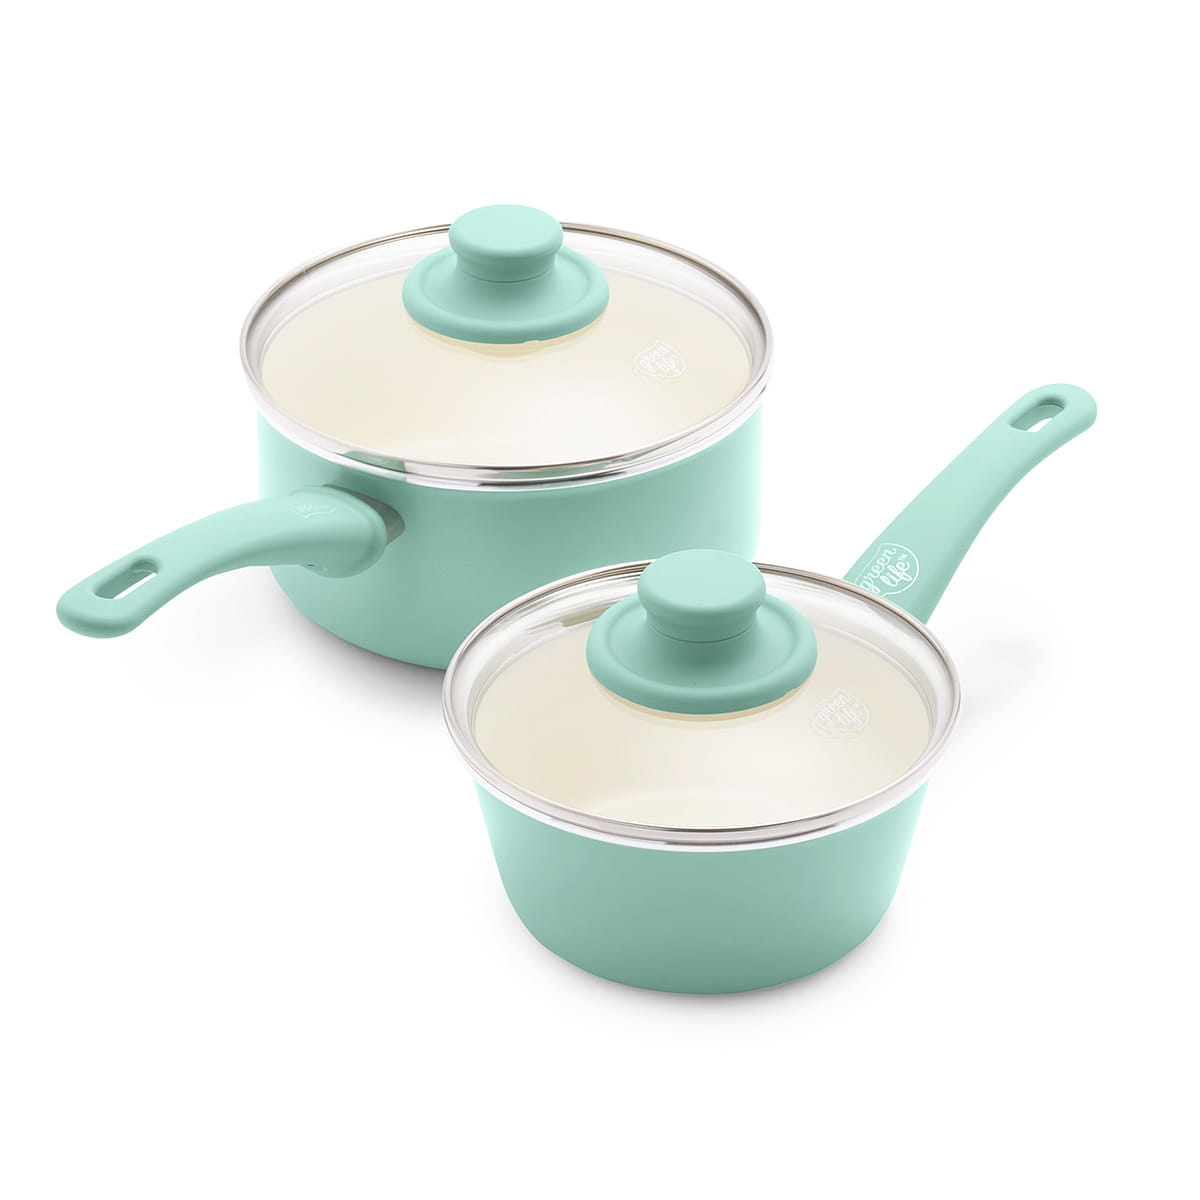 GreenLife Soft Grip<br> 4pc Cookware Sets, Turquoise